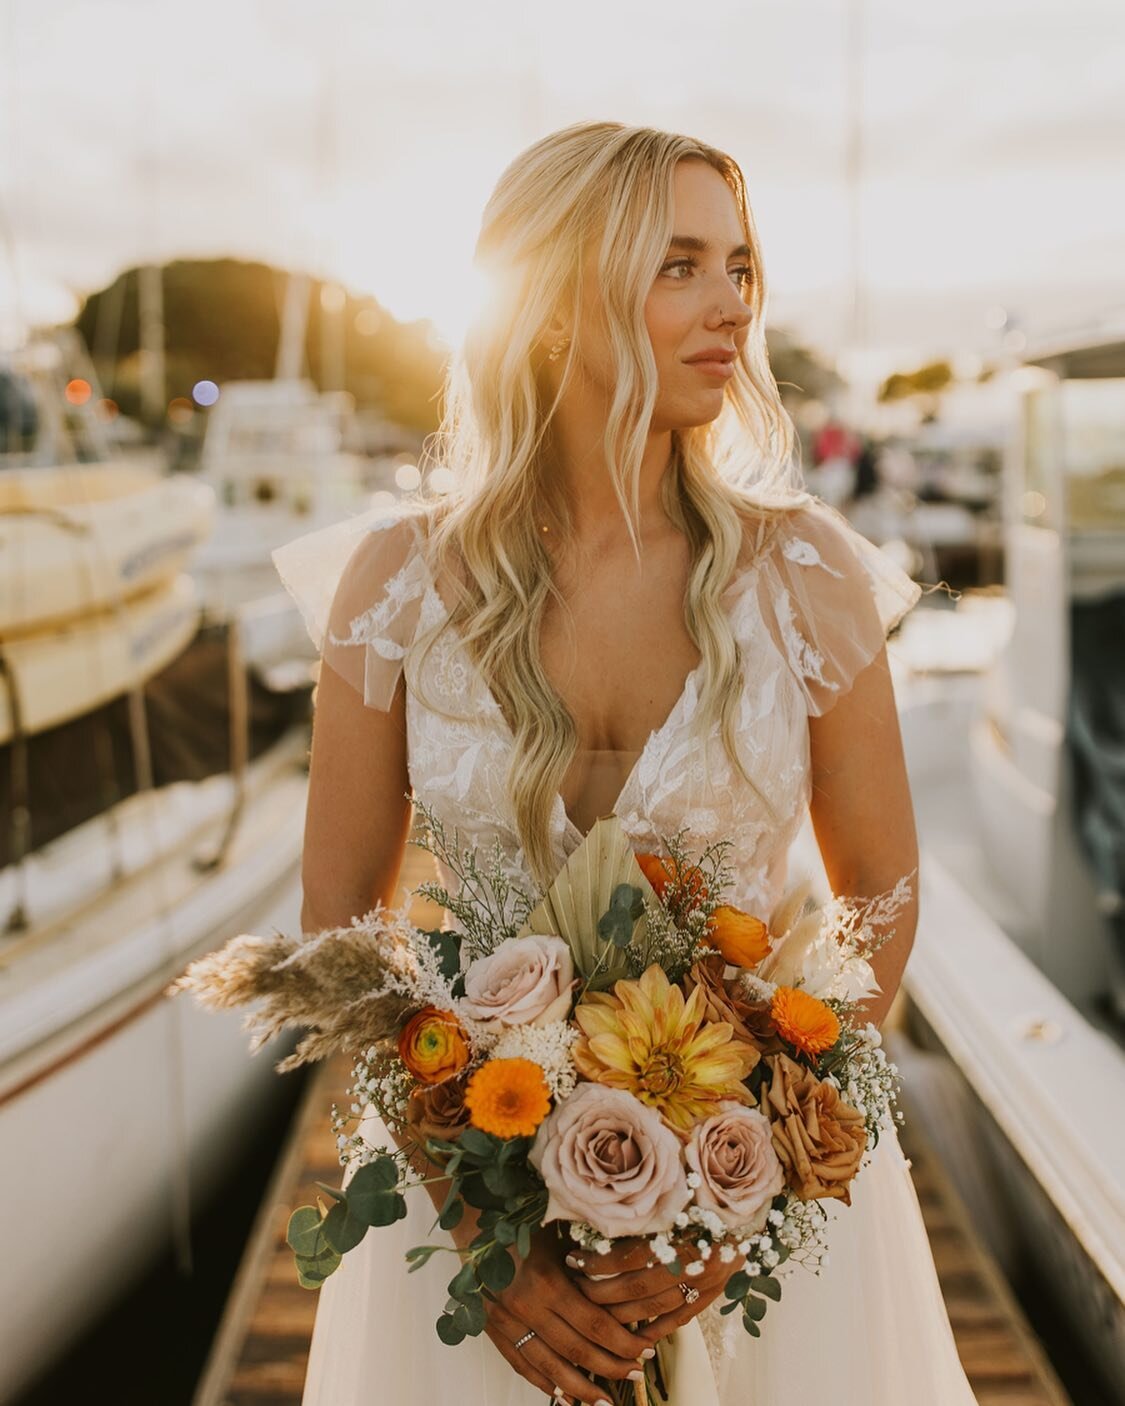 IN LOVEEE!! we all know i&rsquo;m a boho girly so this wedding was the perfect mix for me🥺